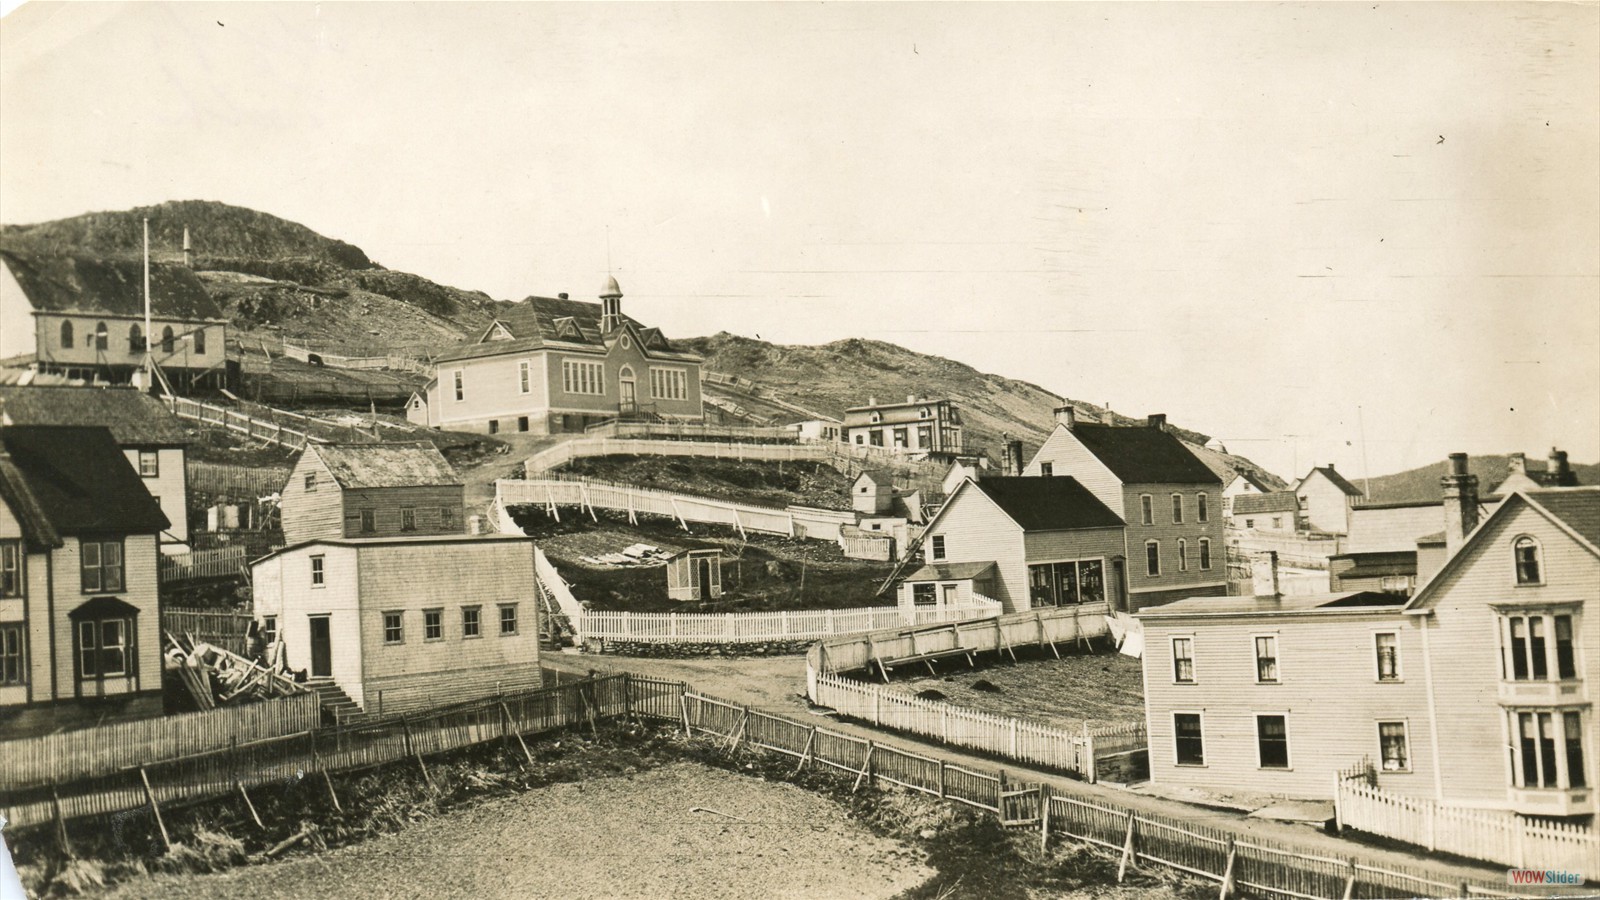 After 1910, shows St. Paul`s Anglican School on Gun Hill